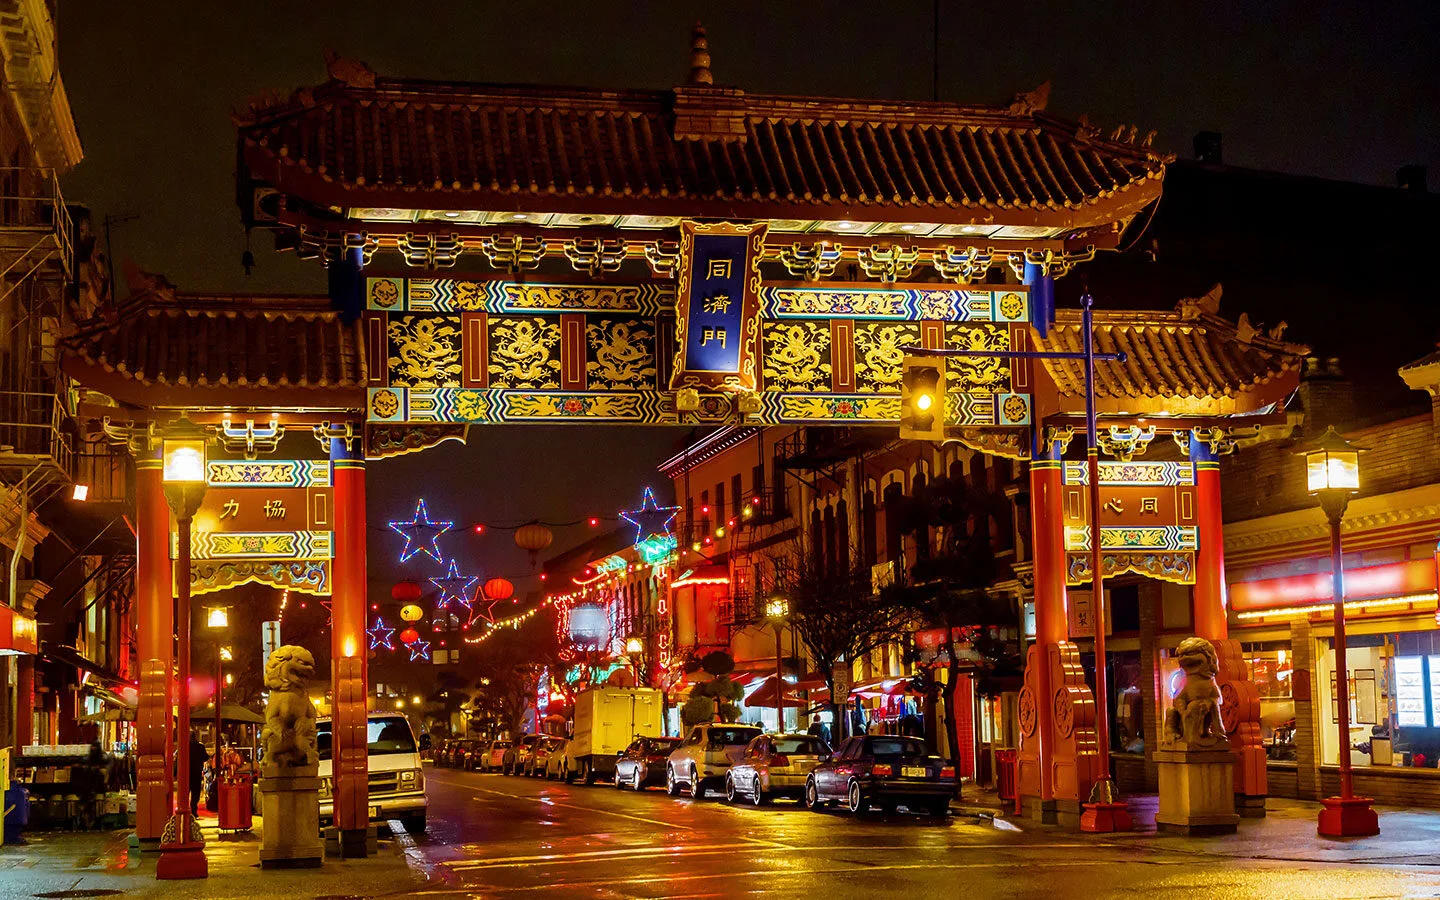 The gate to Chinatown in Victoria, BC